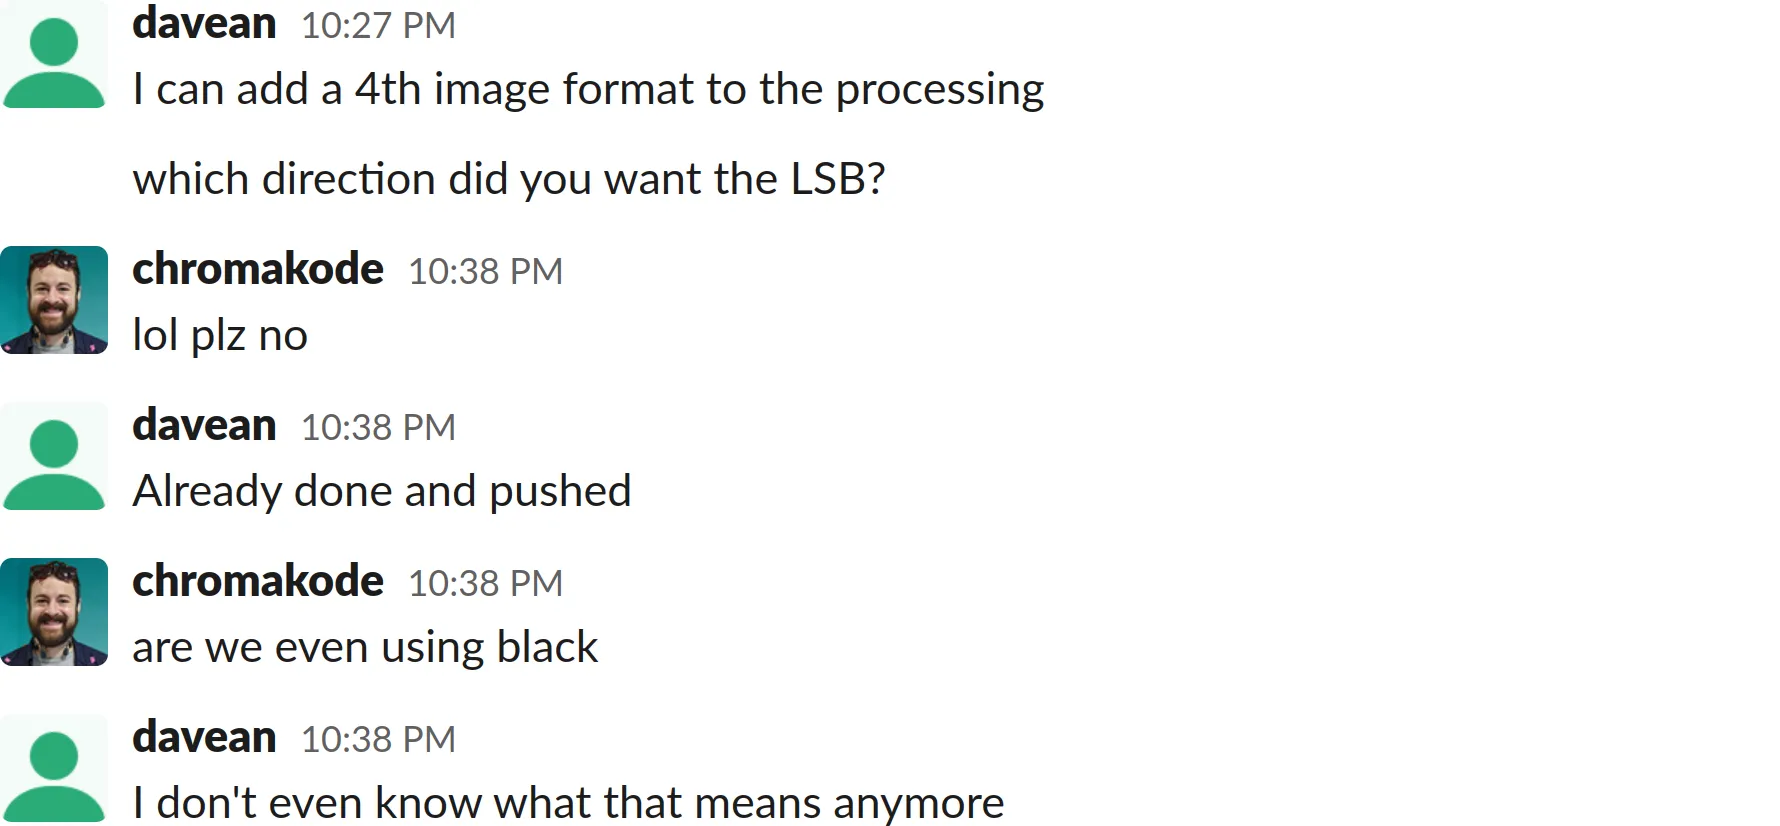 A screenshot of a Slack chat log transcript:
davean: Goddard pushed with the change, will get geoverse rebuilding, but check goddard?
We can go back to that hack ... at least on safari
funny if safari gets the bad color
I can add a 4th image format to the processing
which direction did you want the LSB?
chromakode: lol plz no
davean: Already done and pushed
chromakode: are we even using black
davean: I don&#x27;t even know what that means anymore